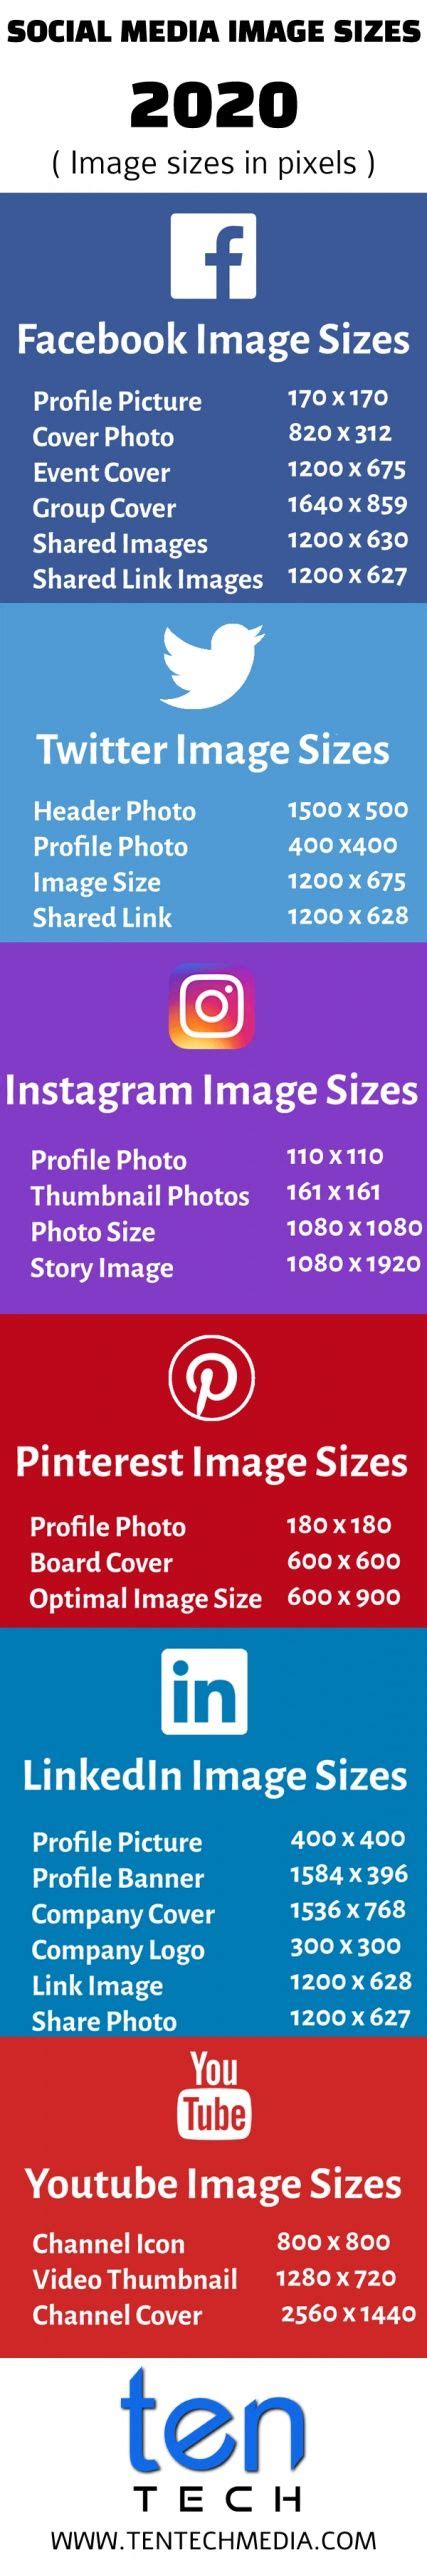 Infographic Of Social Media Image Sizes In 2020 Facebook Image Sizes